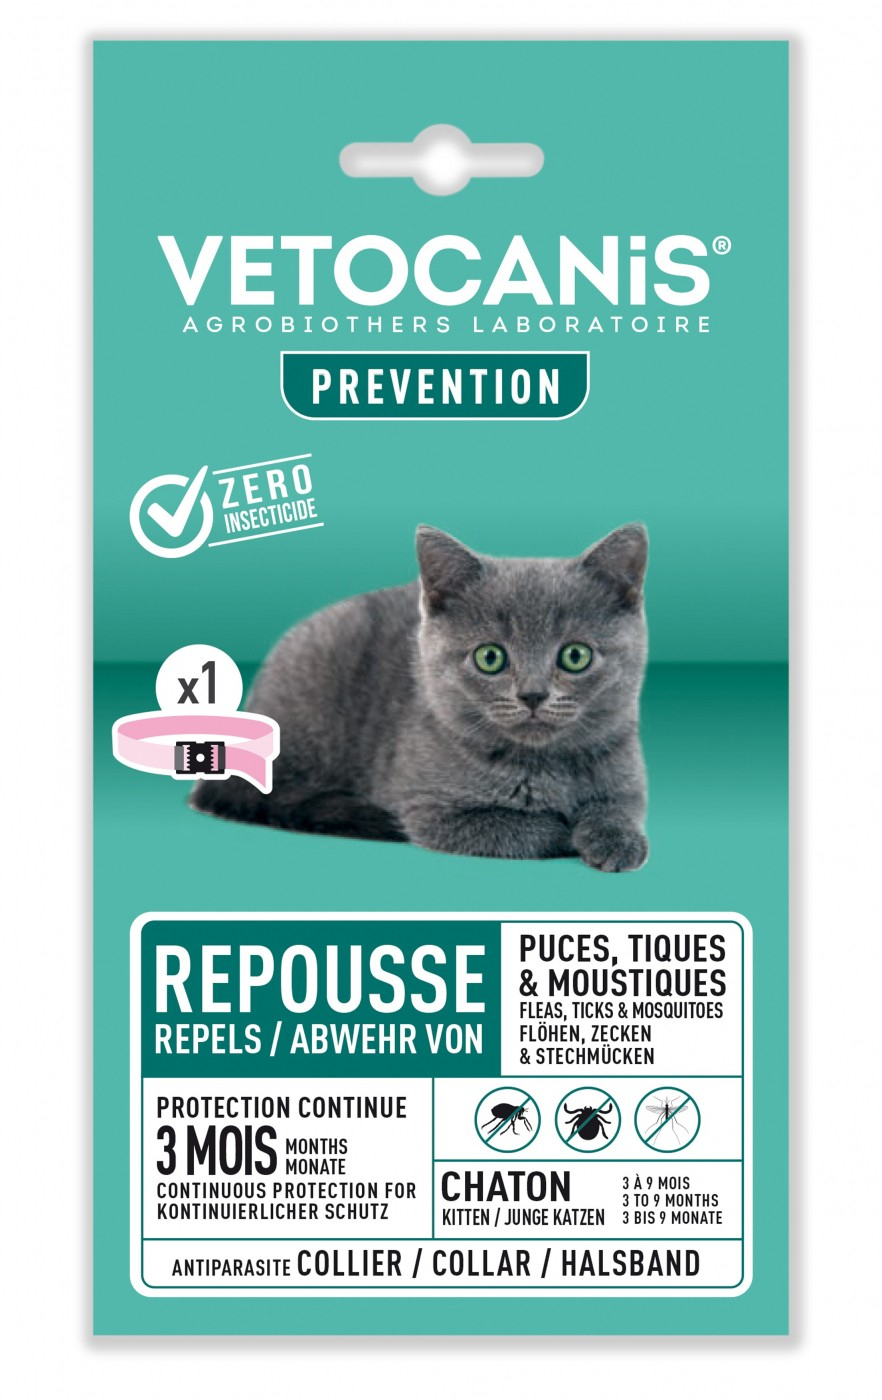 Vetocanis collier antiparasitaire chaton